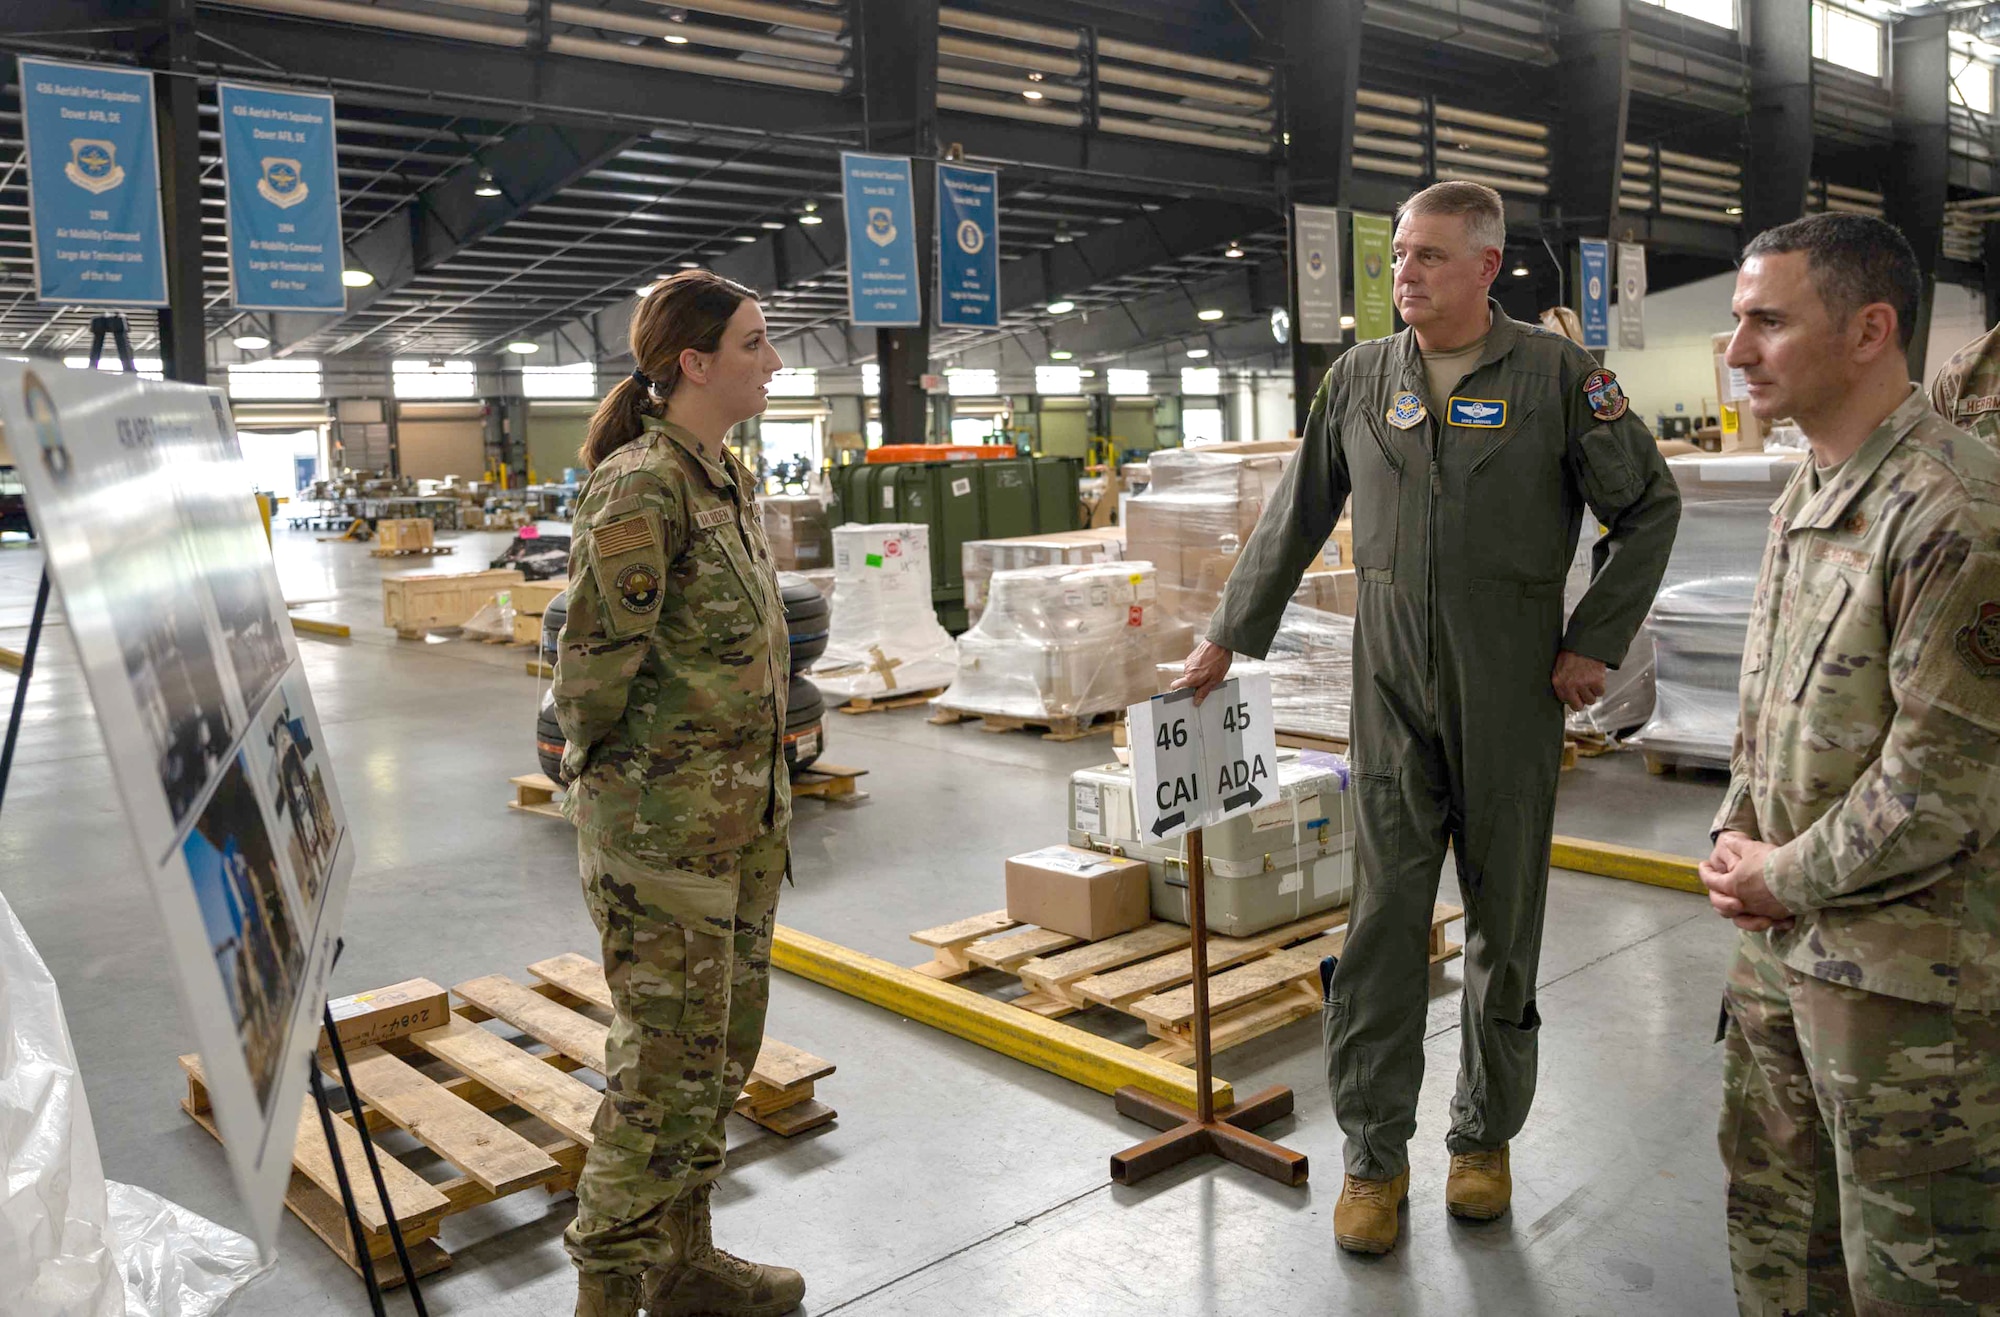 Senior Airman Kaitlyn Van Orden, 436th Aerial Port Squadron ramp specialist, briefs Gen. Mike Minihan, middle, Air Mobility Command commander, and Chief Master Sgt. Brian Kruzelnick, left, AMC command chief, on Foreign Military Sales missions at Dover Air Force Base, Delaware, May 5, 2022. The 436th APS “Super Port” processes $3.5 billion of FMS cargo annually. (U.S. Air Force photo by Senior Airman Faith Schaefer)